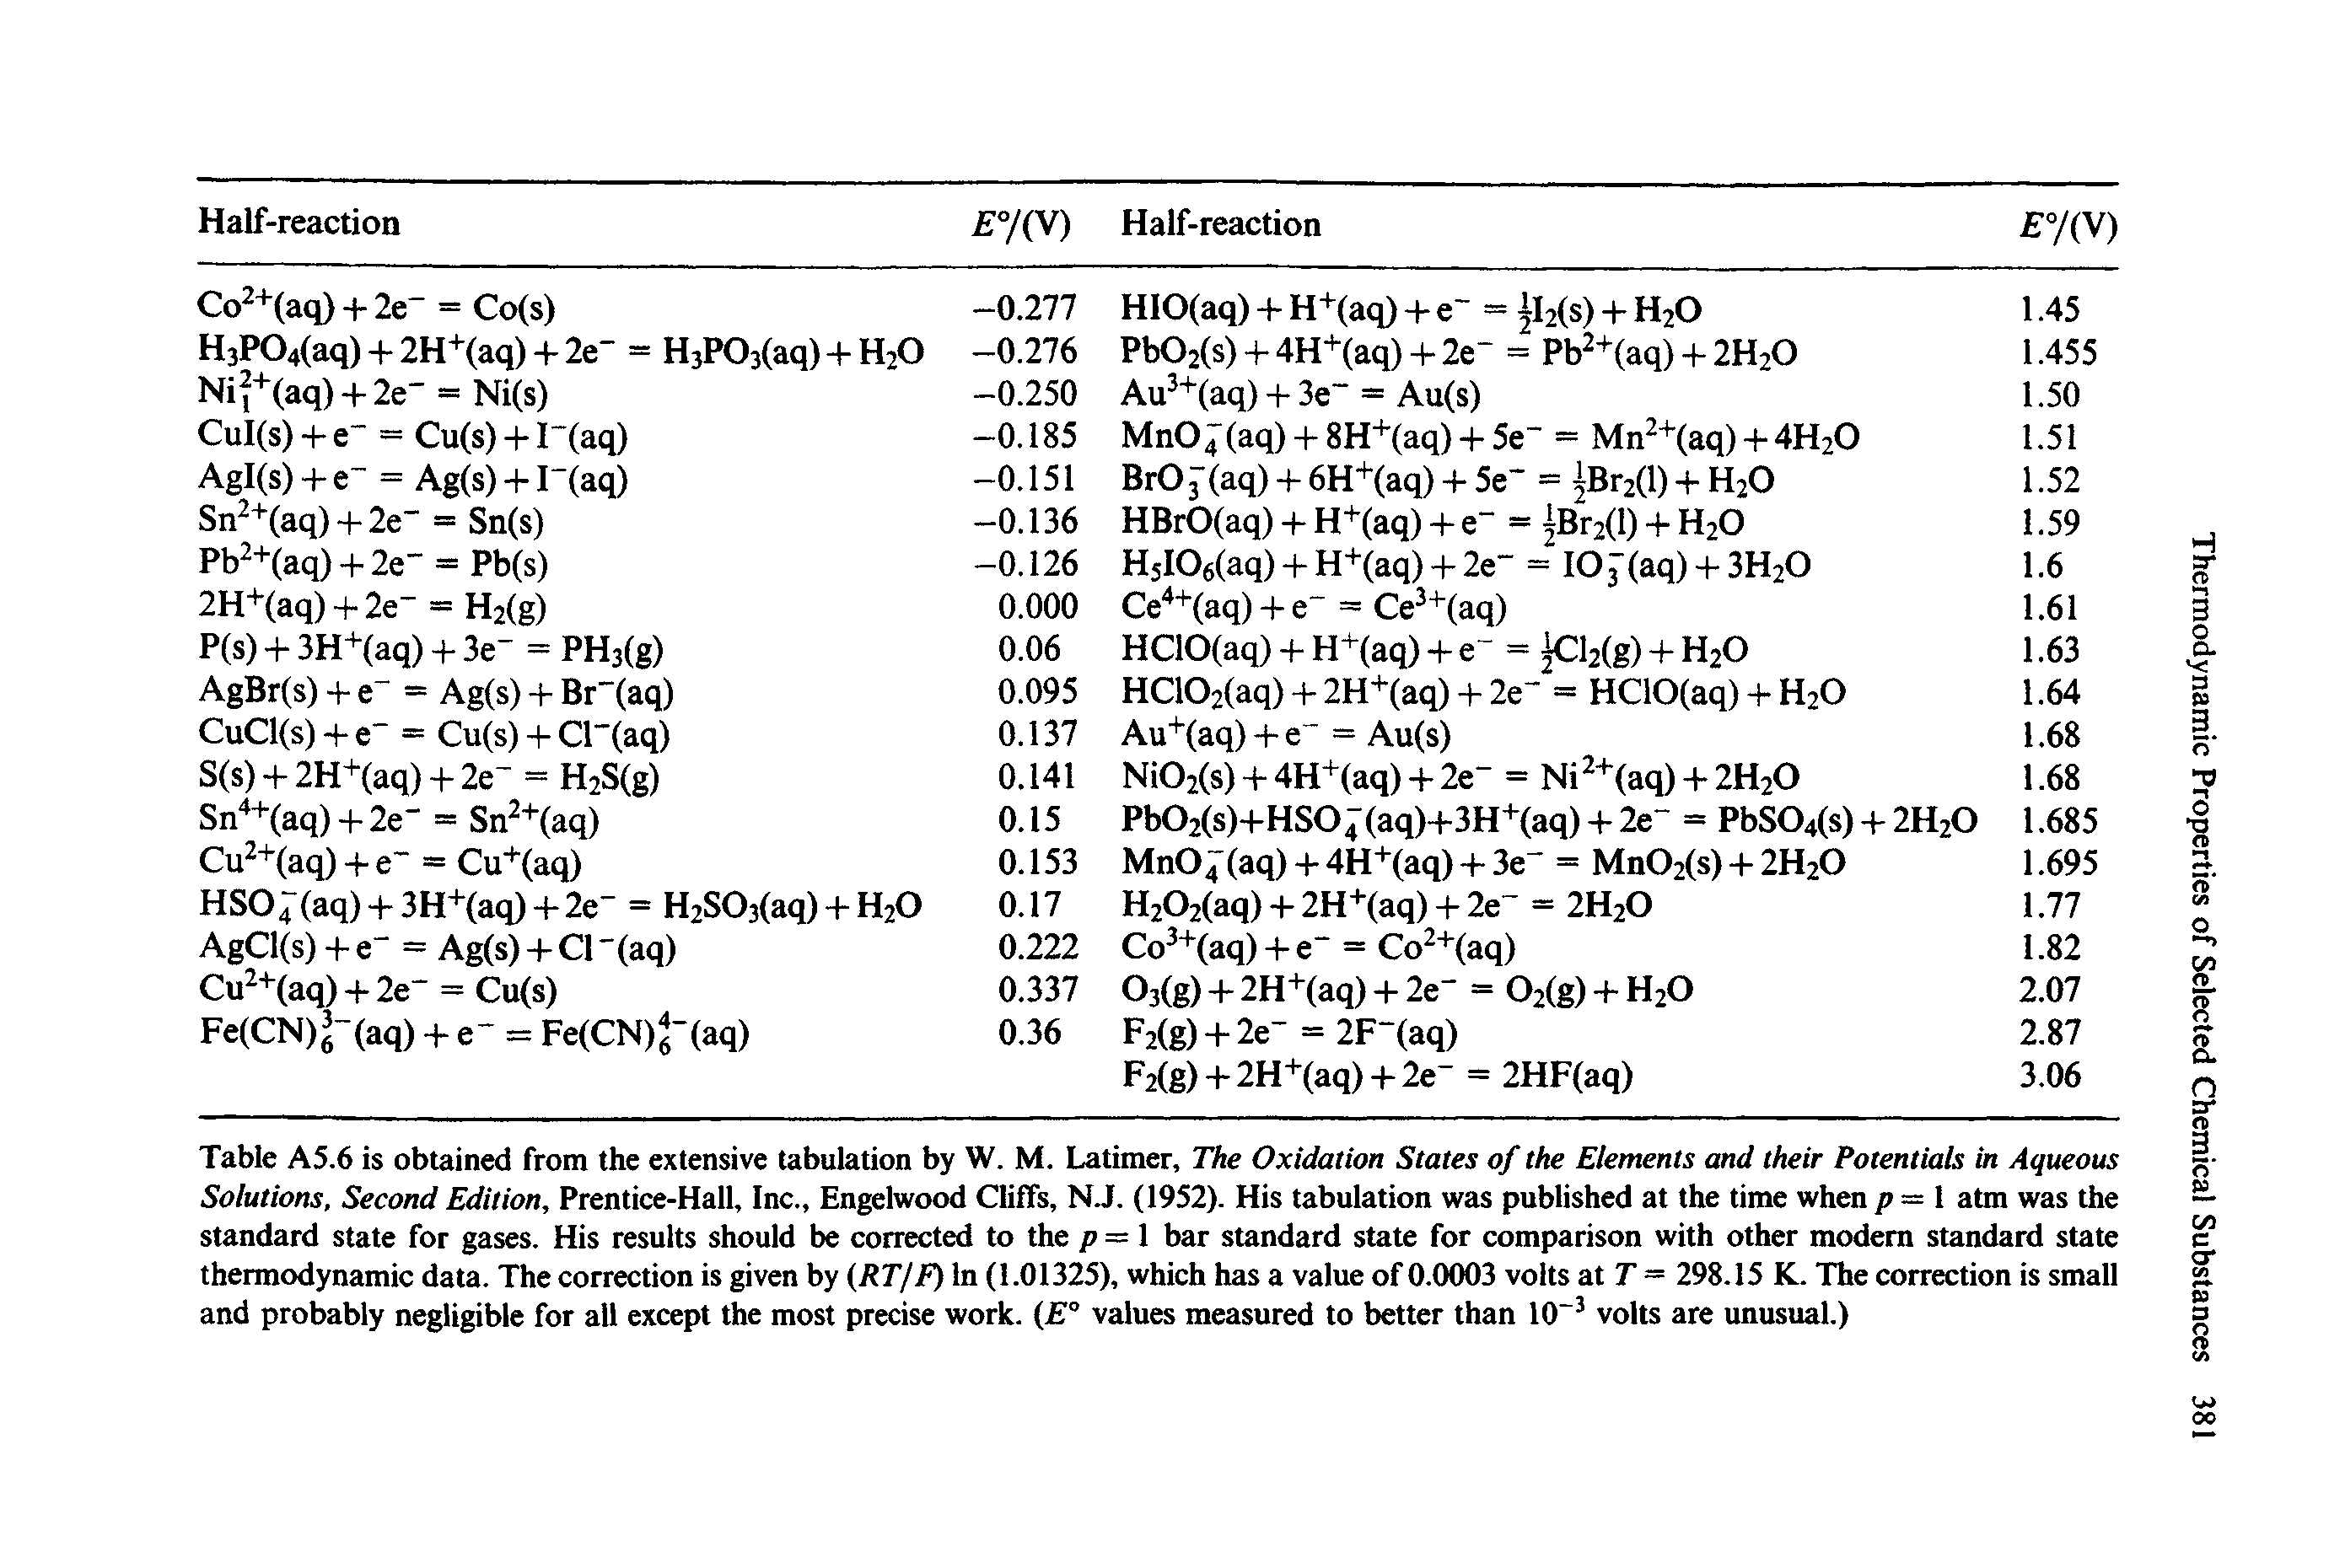 Table A5.6 is obtained from the extensive tabulation by W. M. Latimer, The Oxidation States of the Elements and their Potentials in Aqueous Solutions, Second Edition, Prentice-Hall, Inc., Engelwood Cliffs, N.J. (1952). His tabulation was published at the time when p = 1 atm was the standard state for gases. His results should be corrected to the p = 1 bar standard state for comparison with other modern standard state thermodynamic data. The correction is given by (RT/F) In (1.01325), which has a value of 0.0003 volts at T = 298.15 K. The correction is small and probably negligible for all except the most precise work. (E° values measured to better than 1(T3 volts are unusual.)...